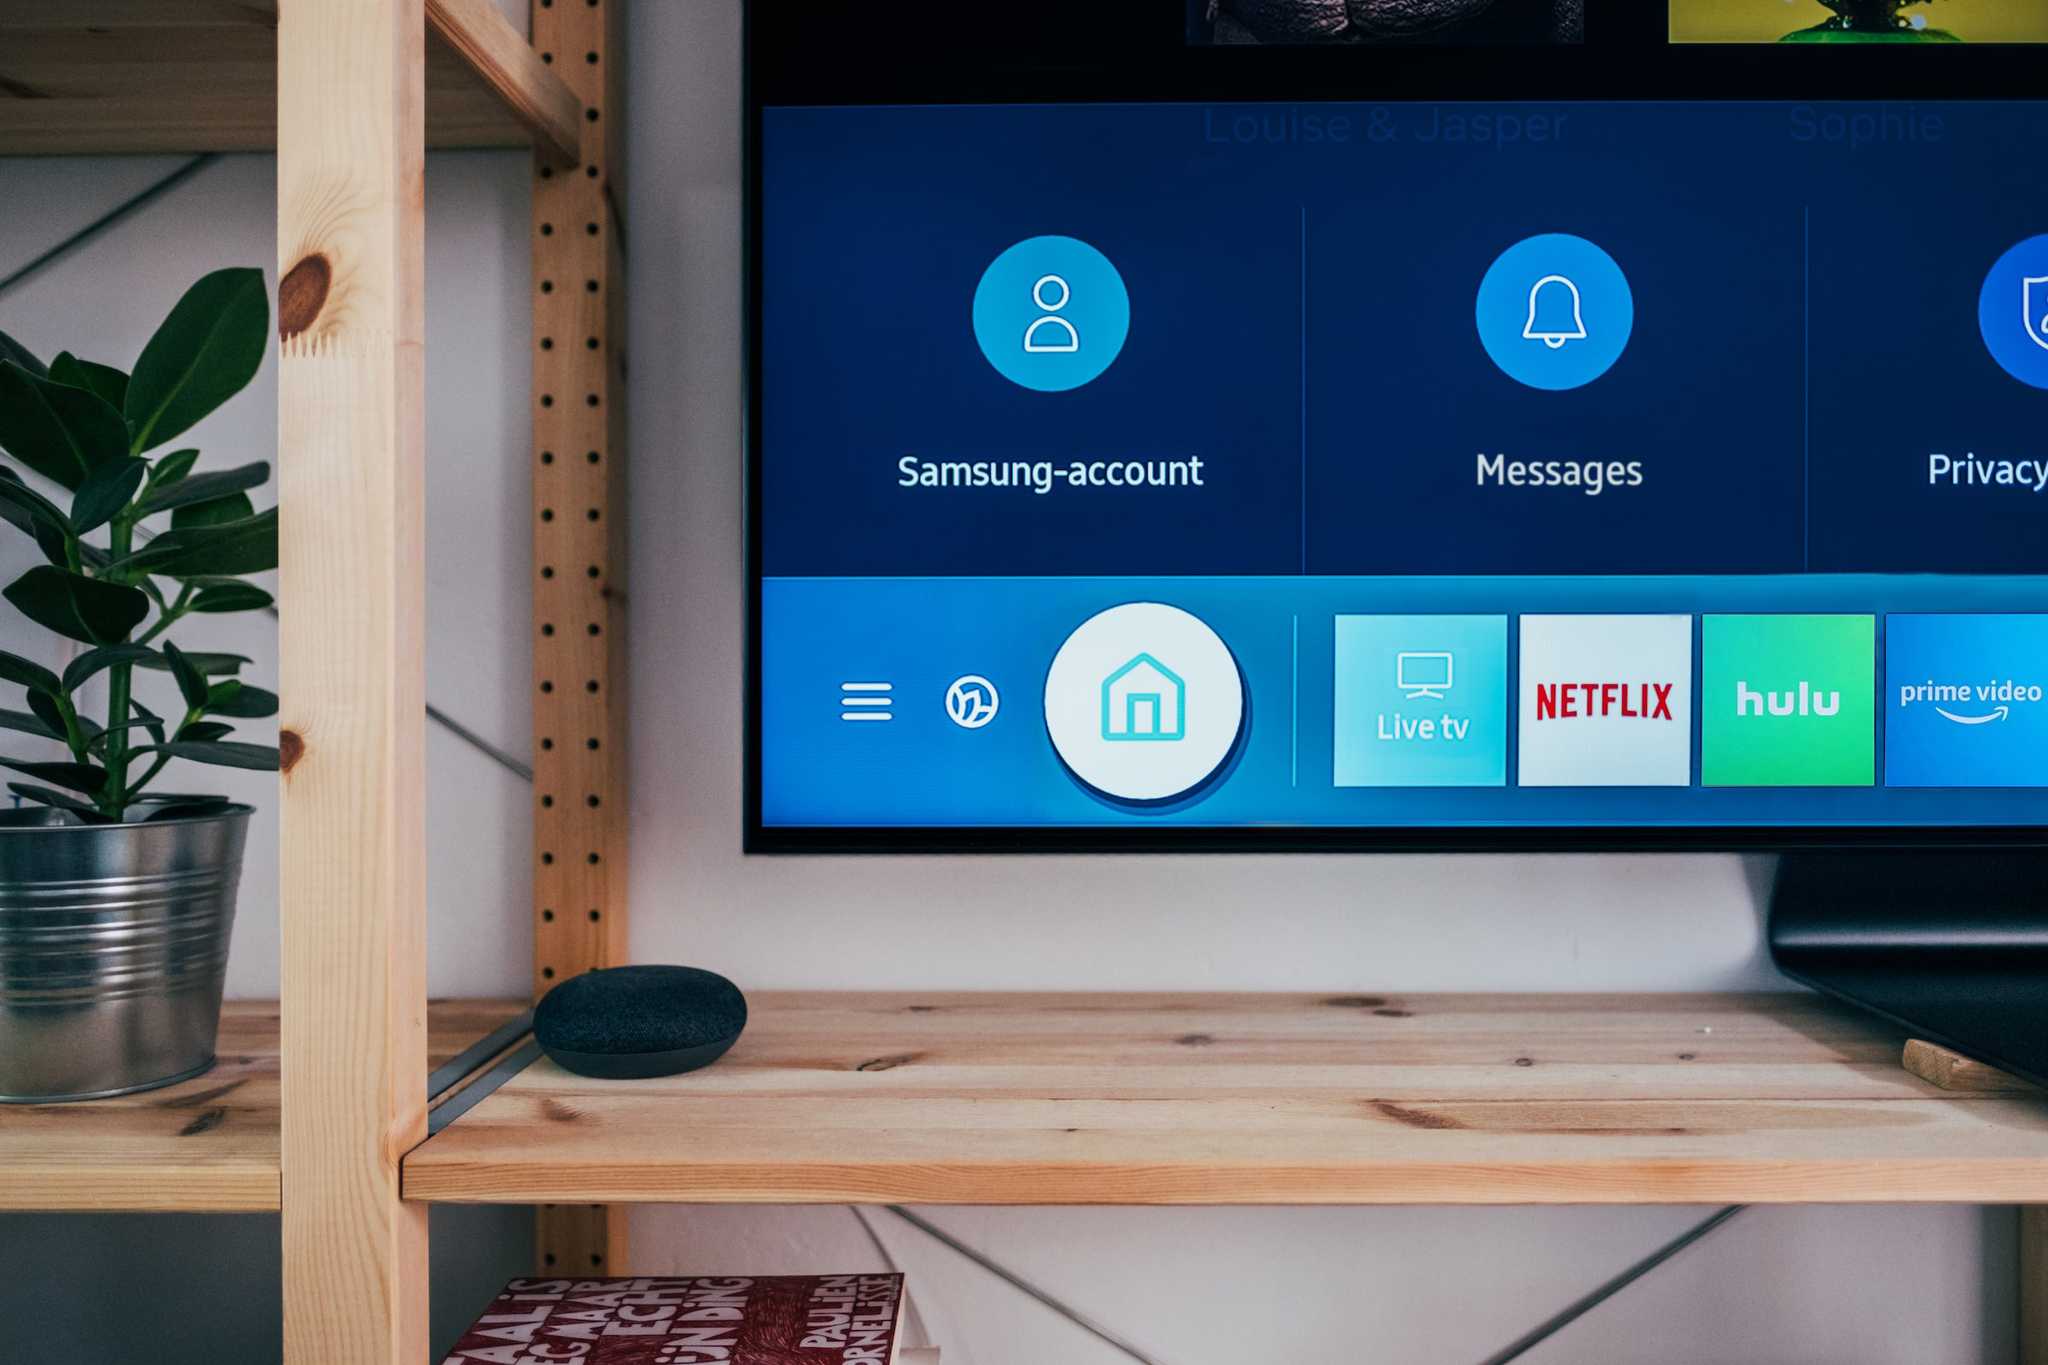 The screen of a Samsung TV displaying links to several apps. Image courtesy of Jonas Leupe on Unsplash.